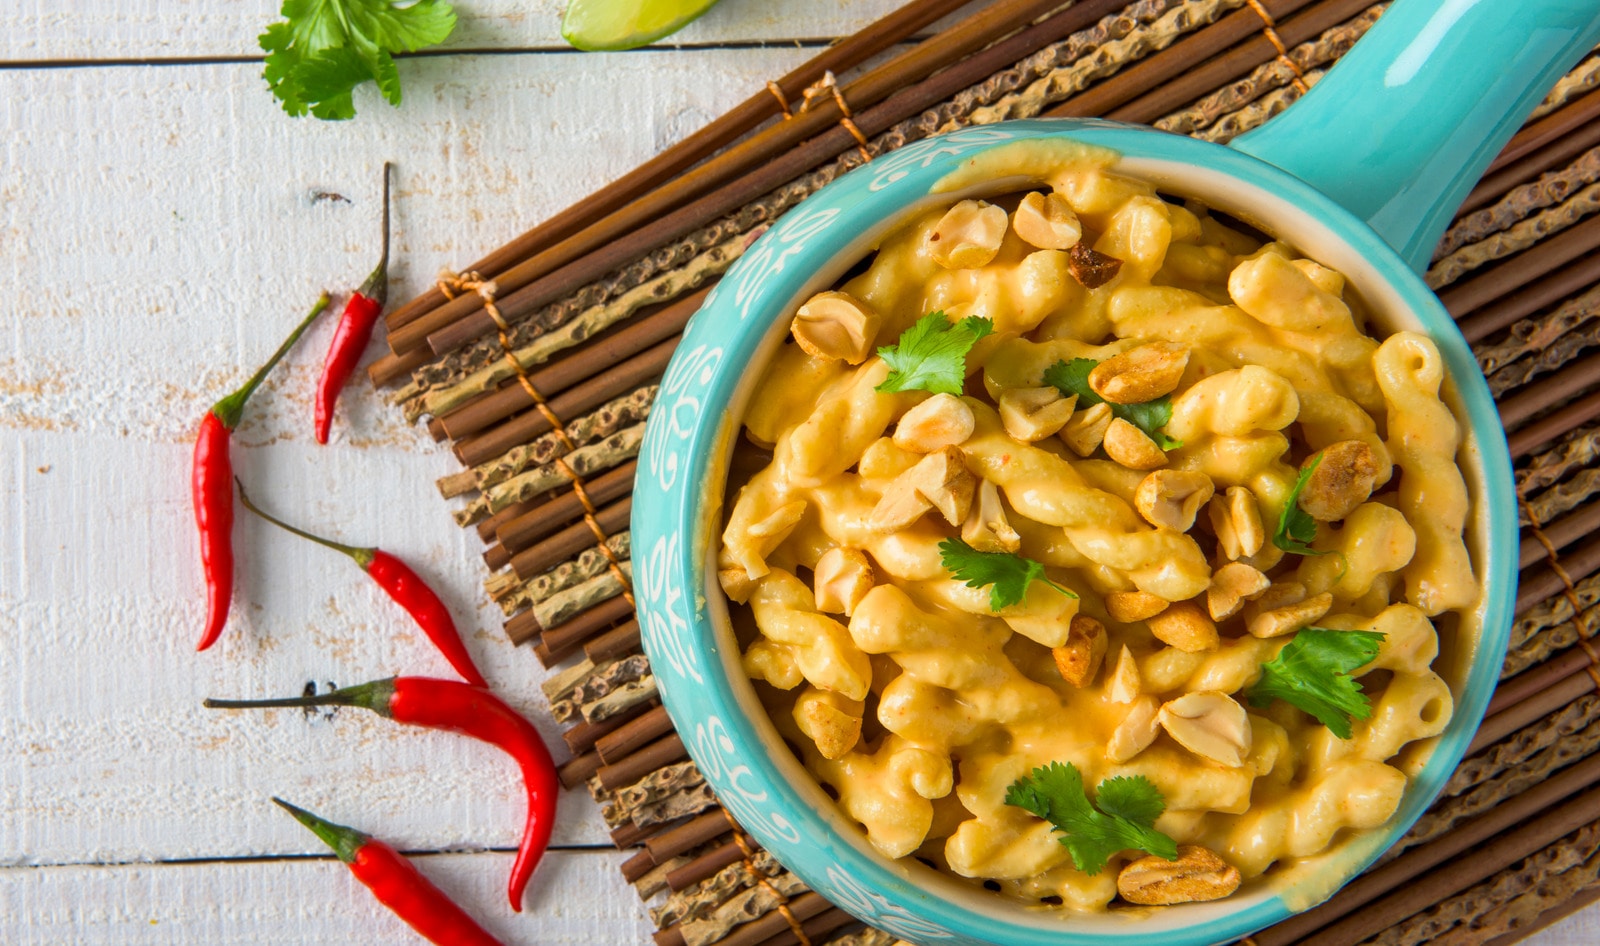 23 Vegan Mac and Cheese Recipes You Need to Try